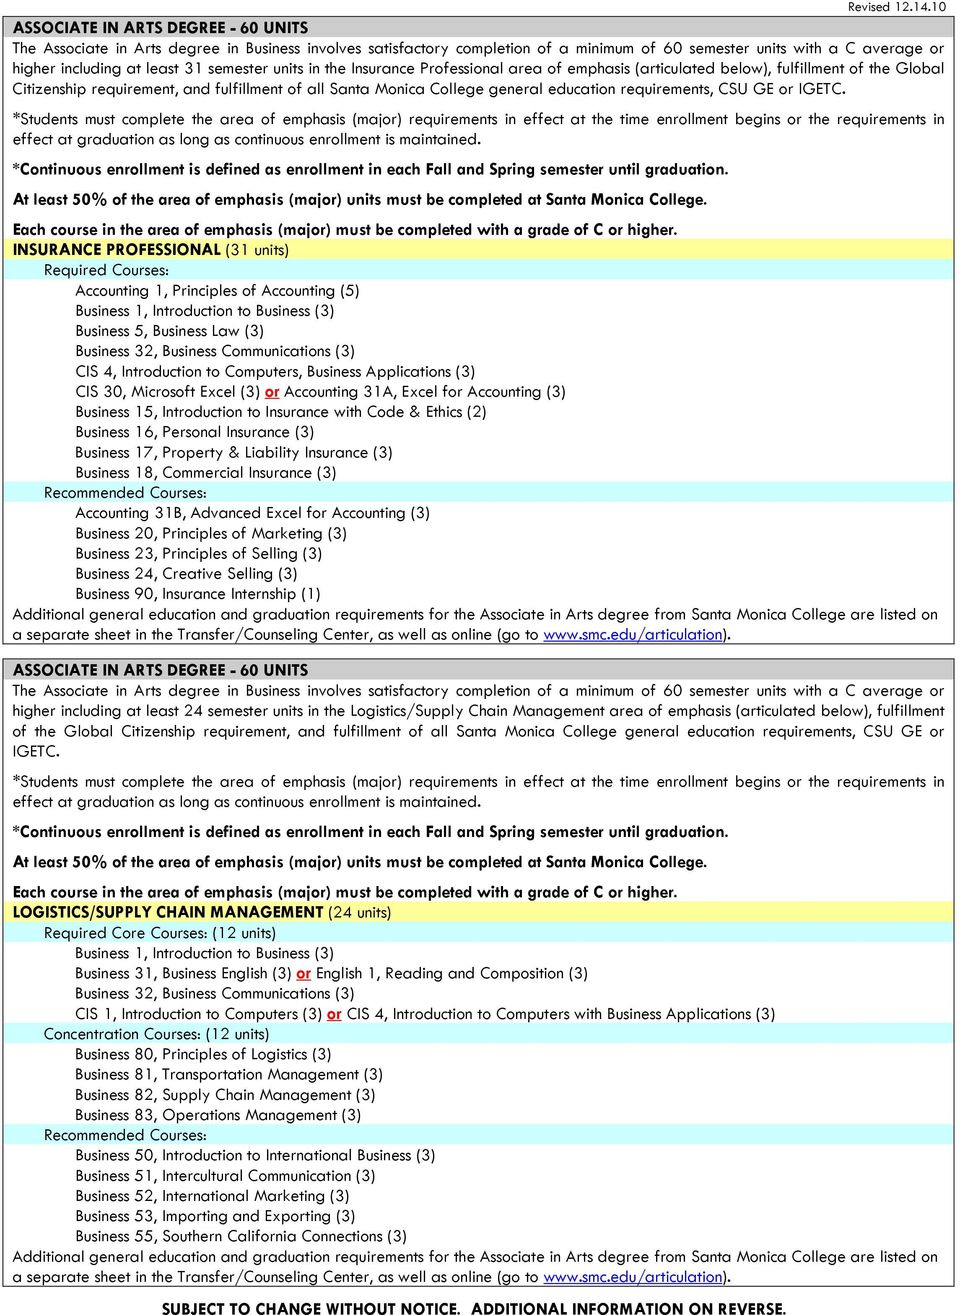 semester units in the Insurance Professional area of emphasis (articulated below), fulfillment of the Global Citizenship requirement, fulfillment of all Santa Monica College general education